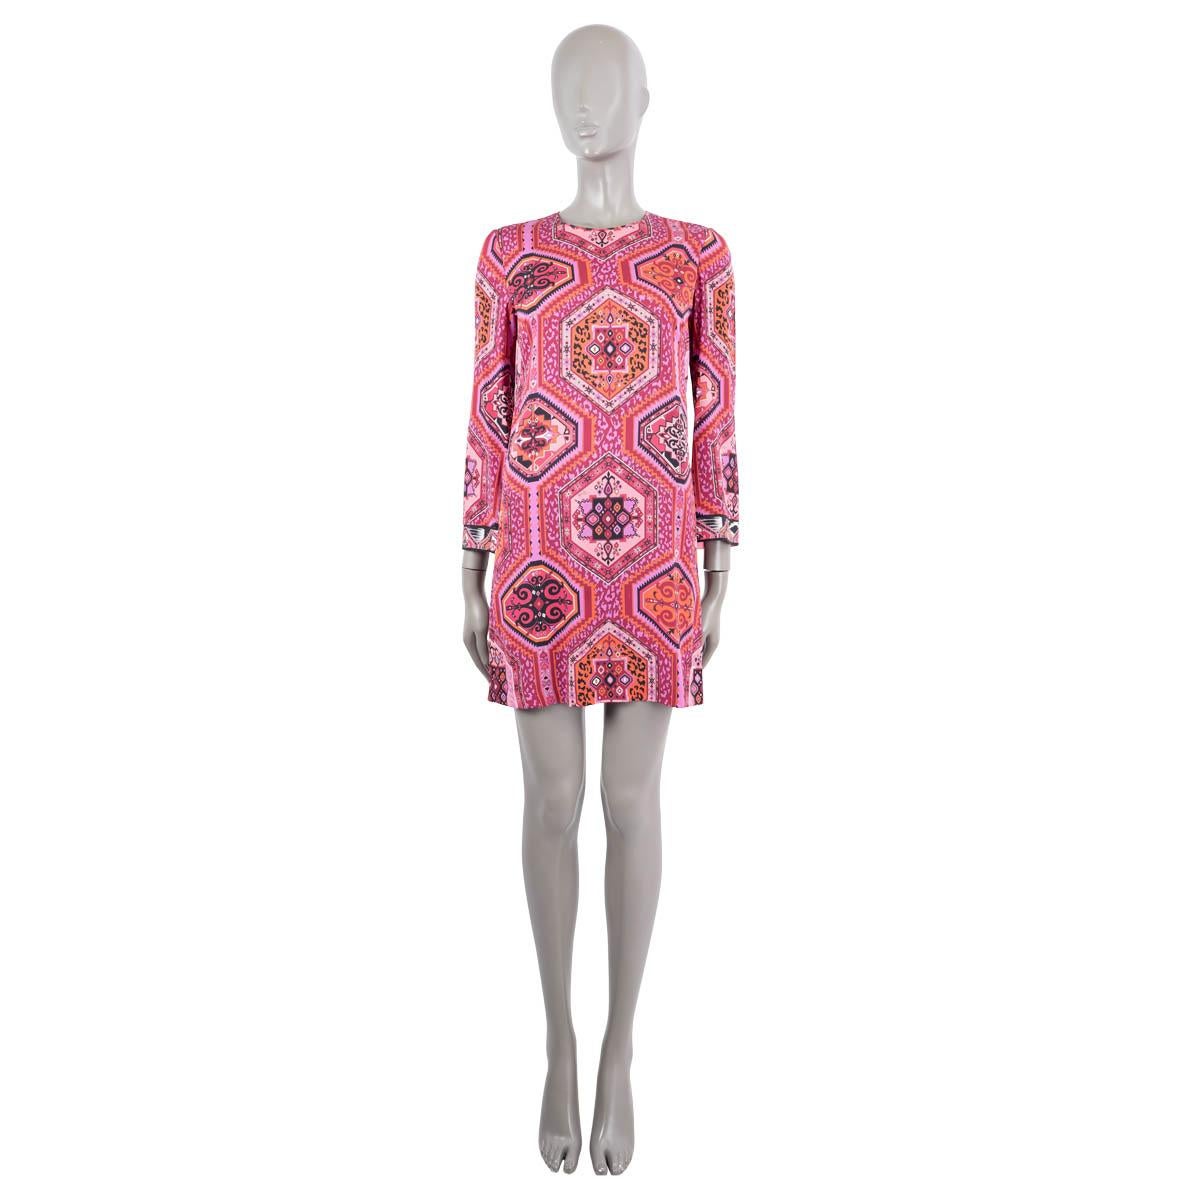 100% authentic Emilio Pucci long sleeve printed straight dress in pink, magenta, coral, black and white silk (94%) and elastane (6%). The design features flared sleeves and a buttoned keyhole on the back. Unlined. Has been worn and is in excellent